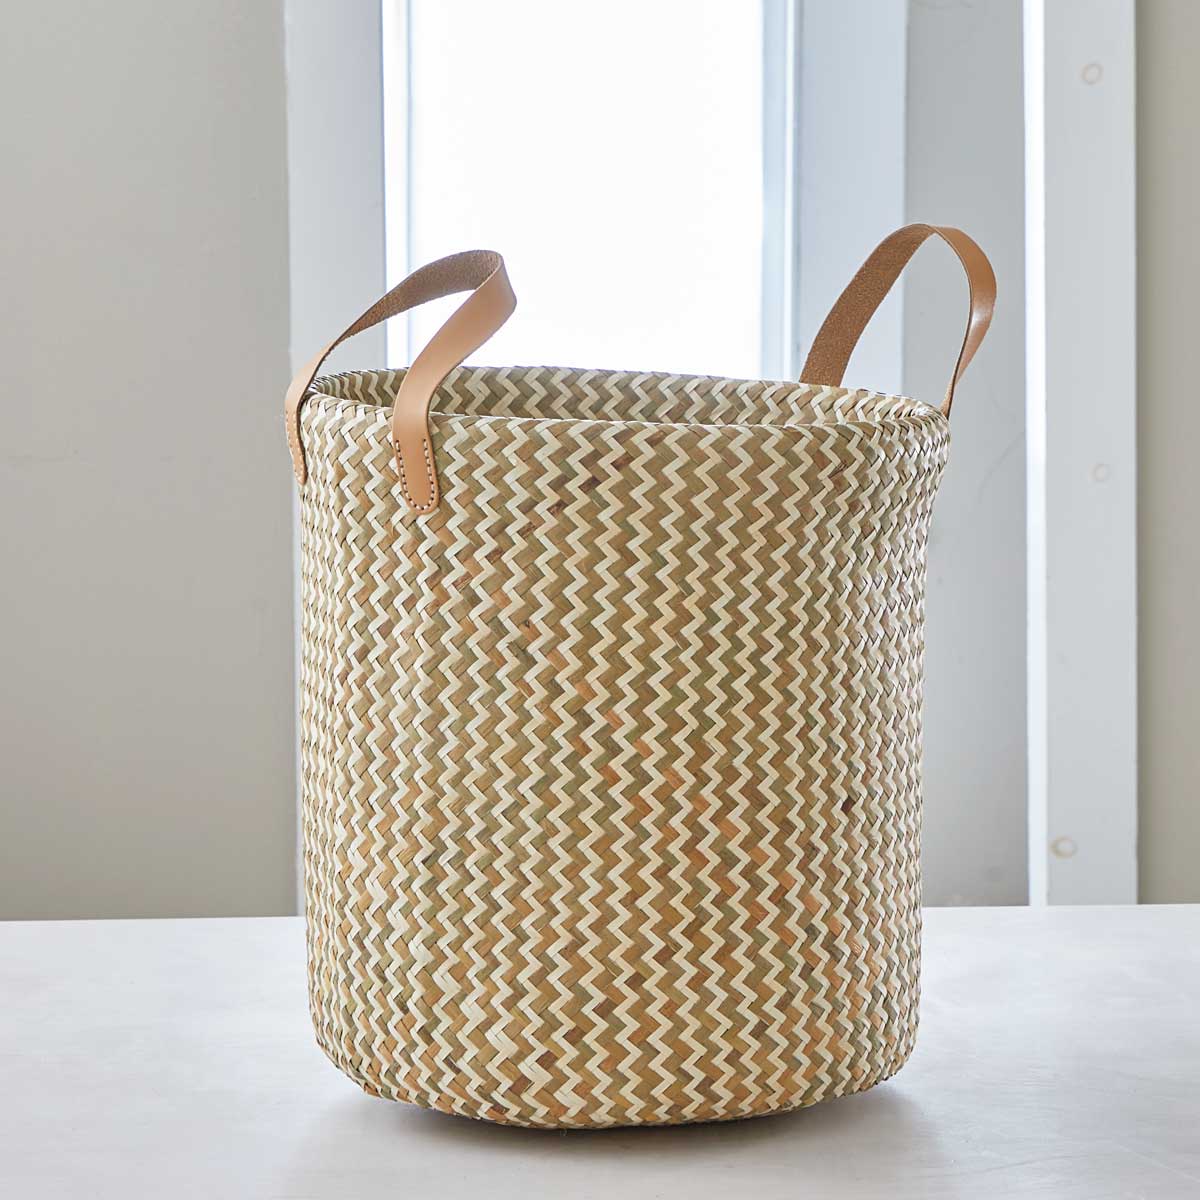 HANDWOVEN BASKETS with LEATHER HANDLES